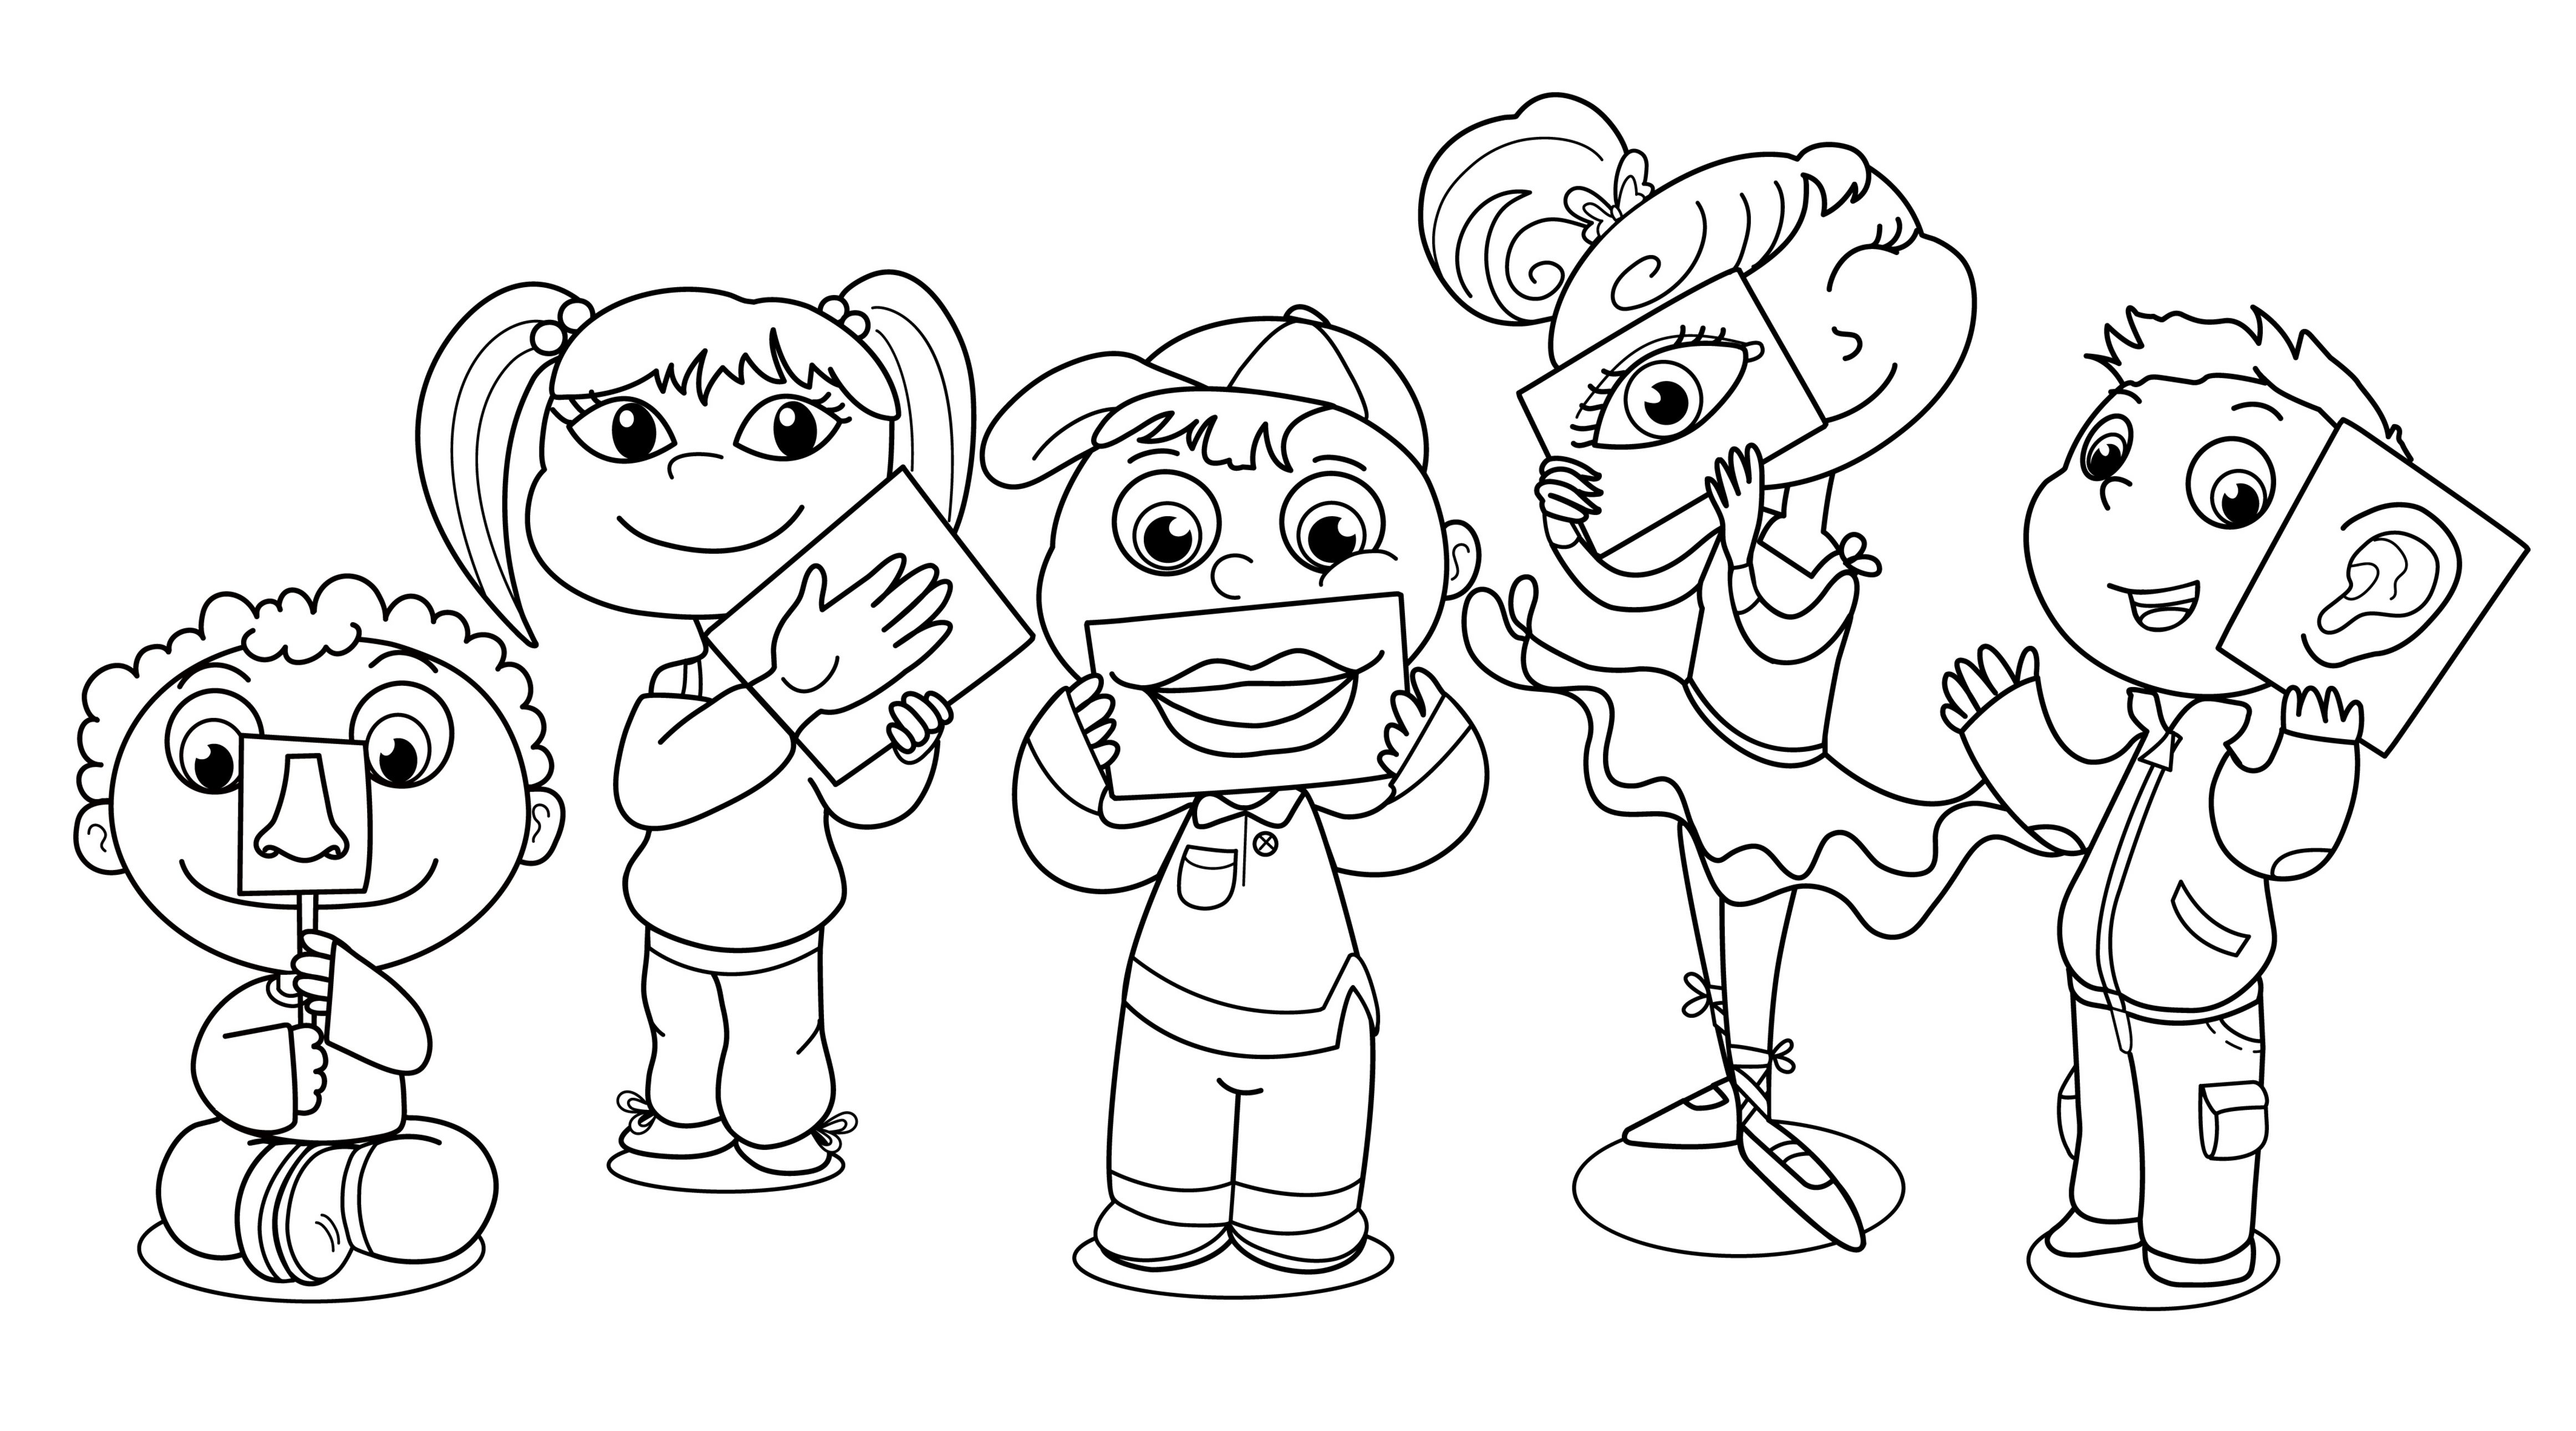 5 senses clipart coloring page. Pin on five 